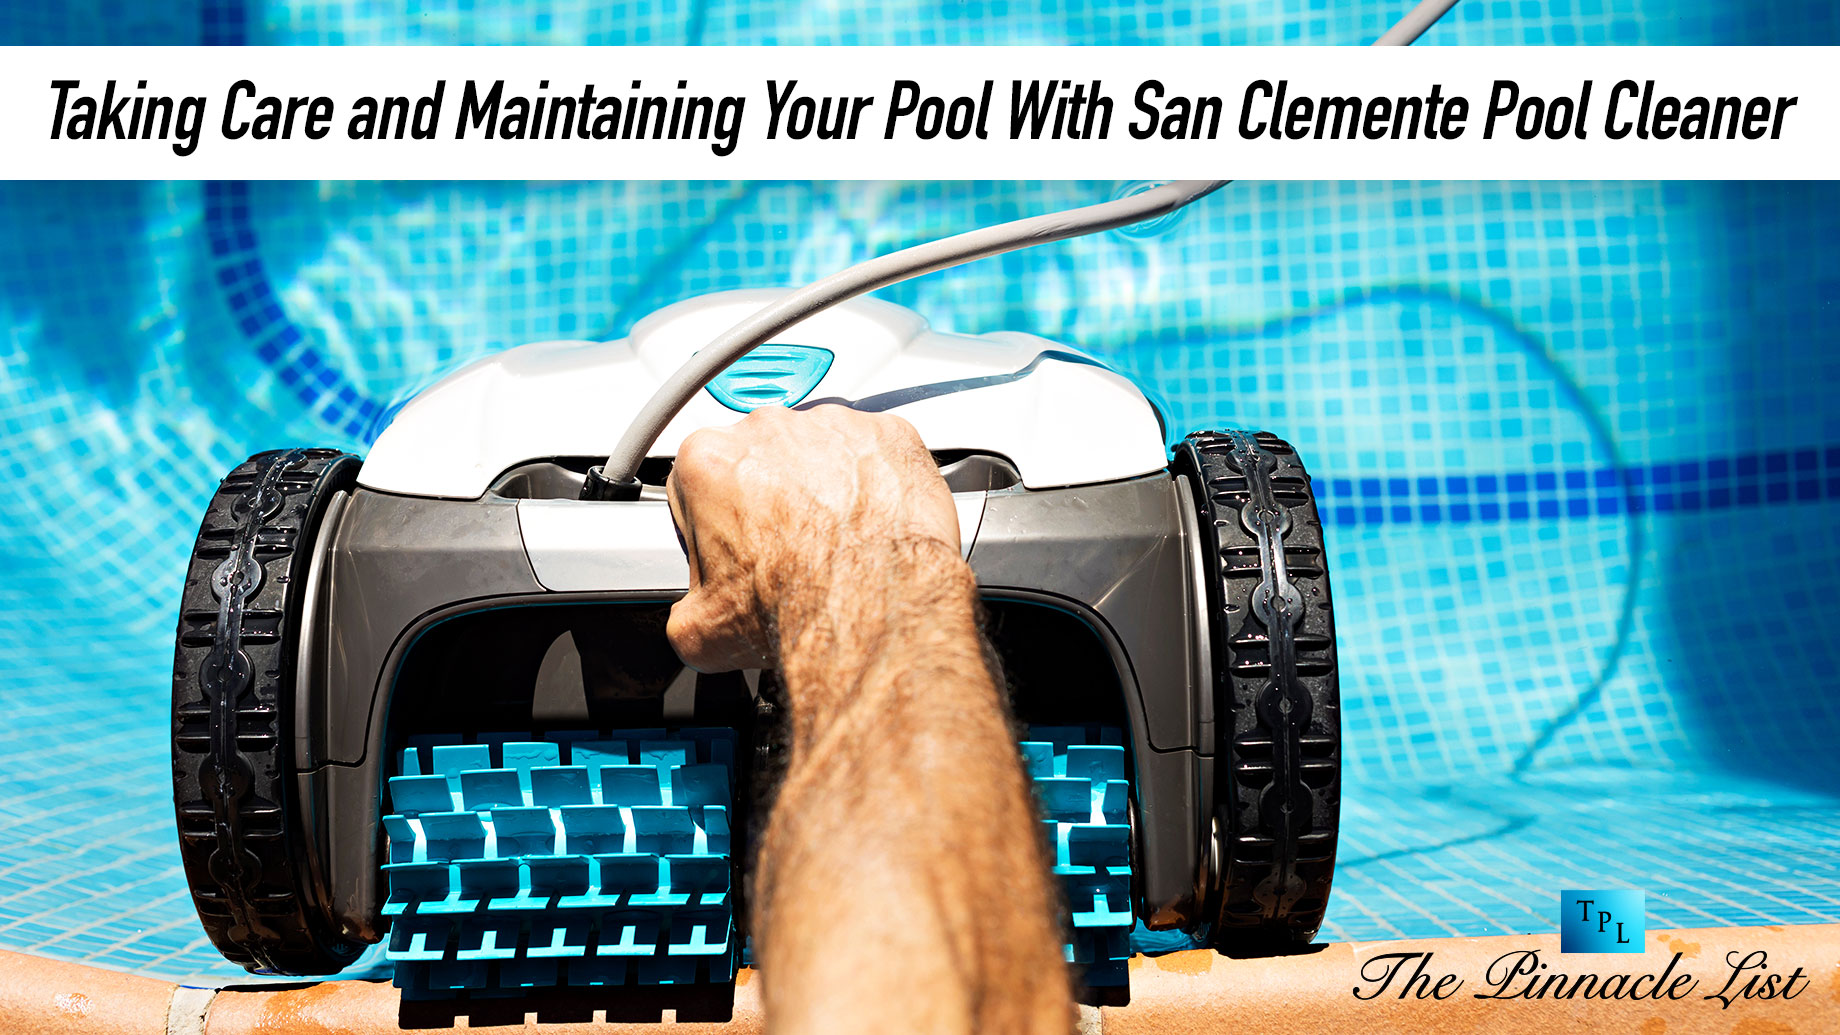 Taking Care and Maintaining Your Pool With San Clemente Pool Cleaner